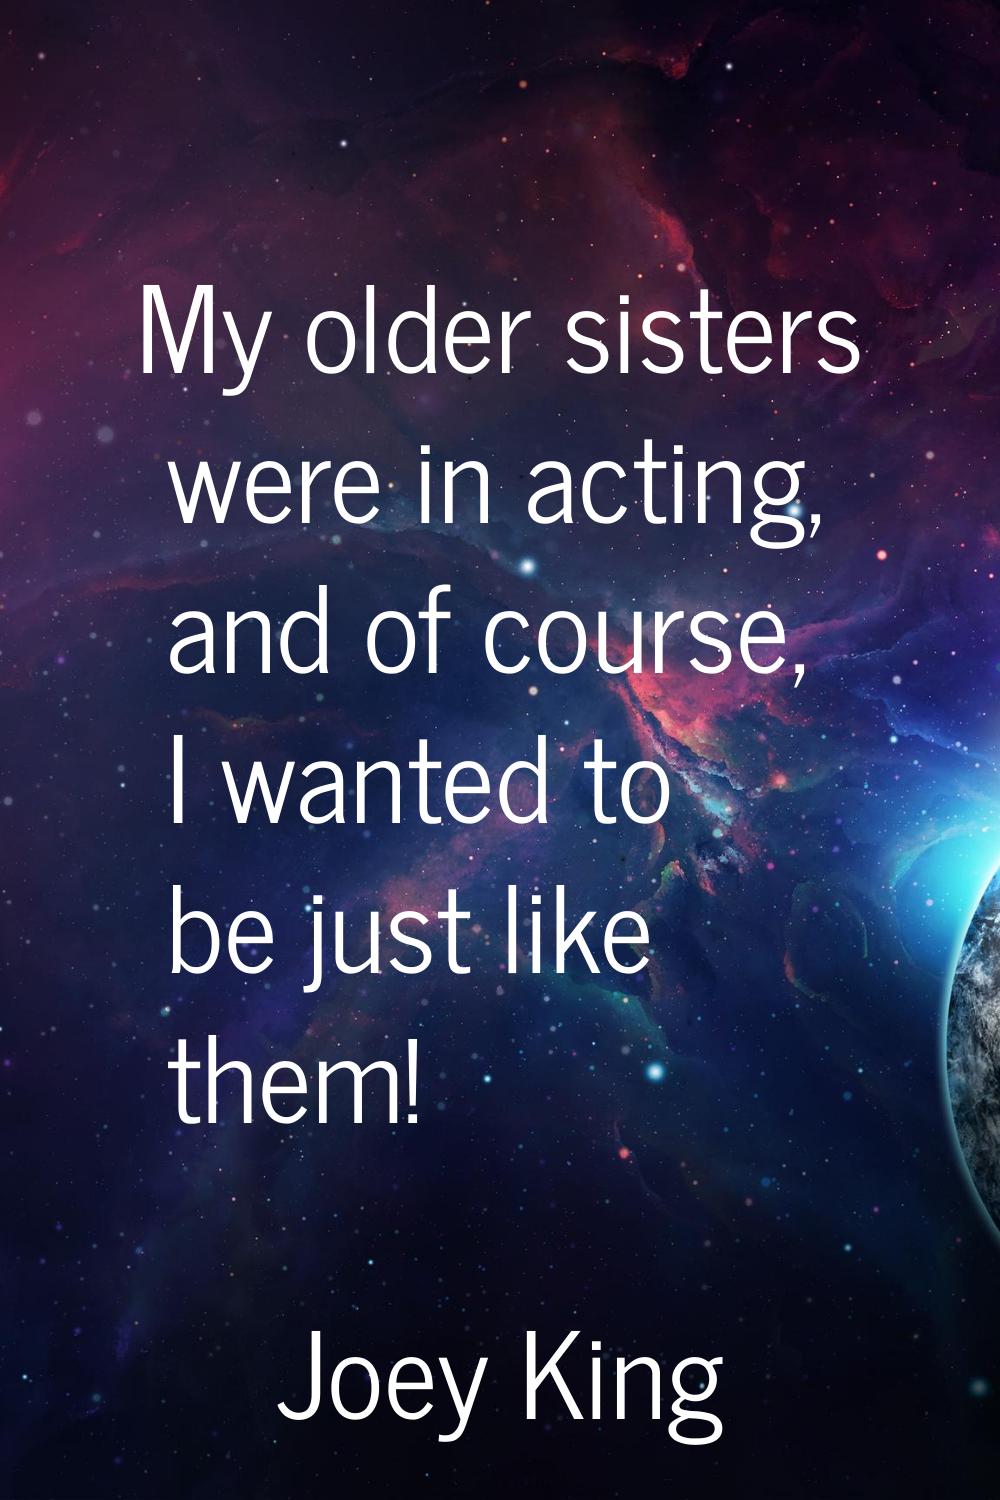 My older sisters were in acting, and of course, I wanted to be just like them!